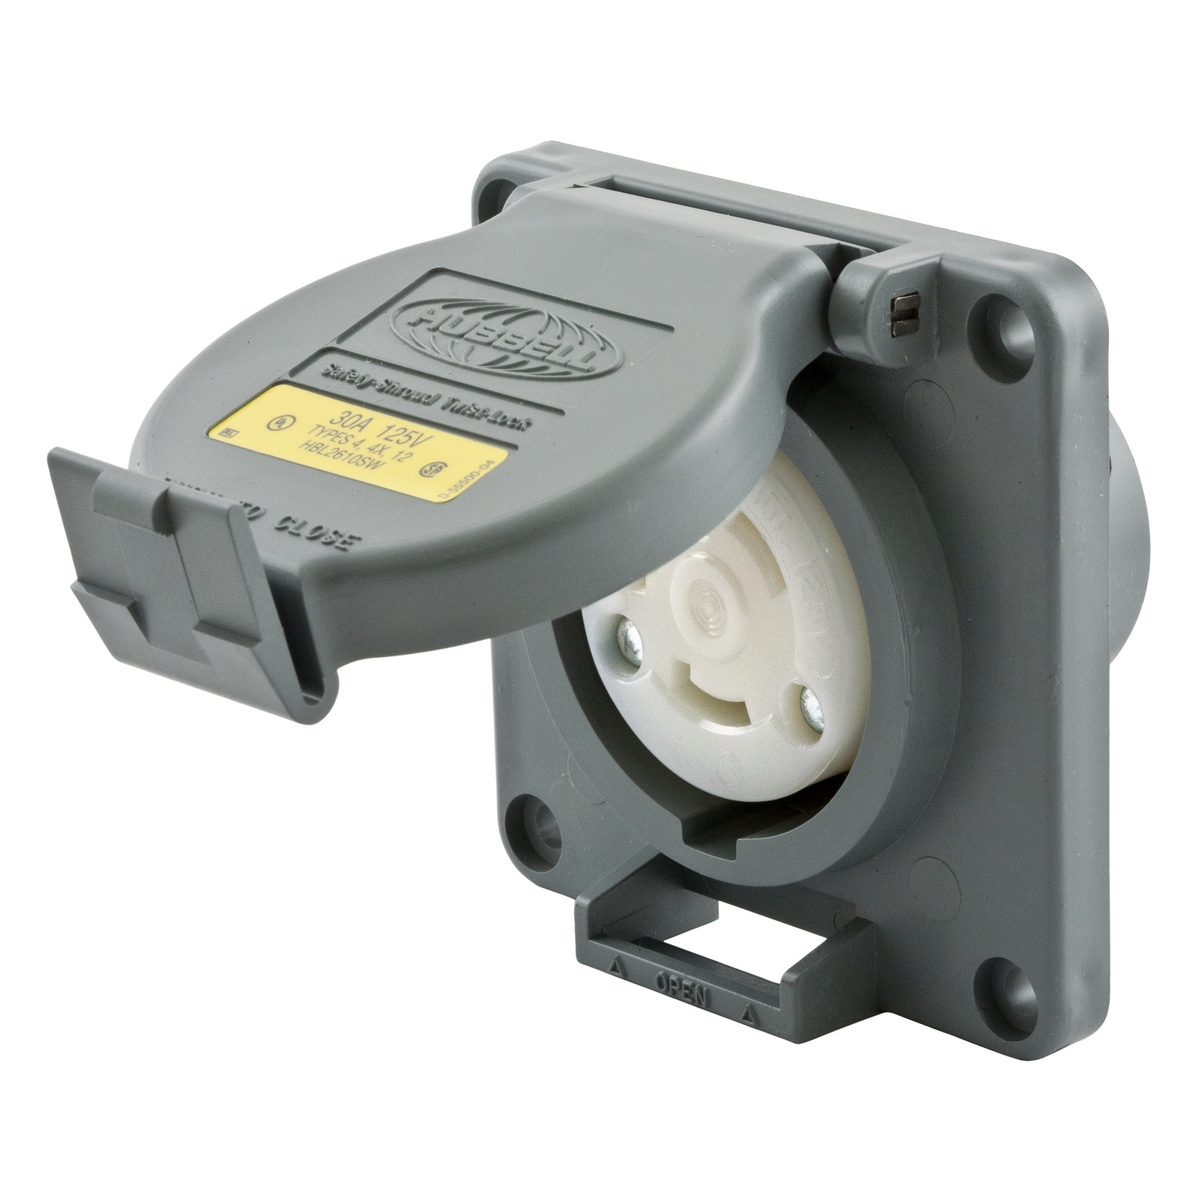 Locking Devices, Twist-Lock®, Watertight Safety Shroud, Receptacle, 30A 125V,  2-Pole 3-Wire Grounding, L5-30R, Screw Terminal, Gray, HBL2610SW